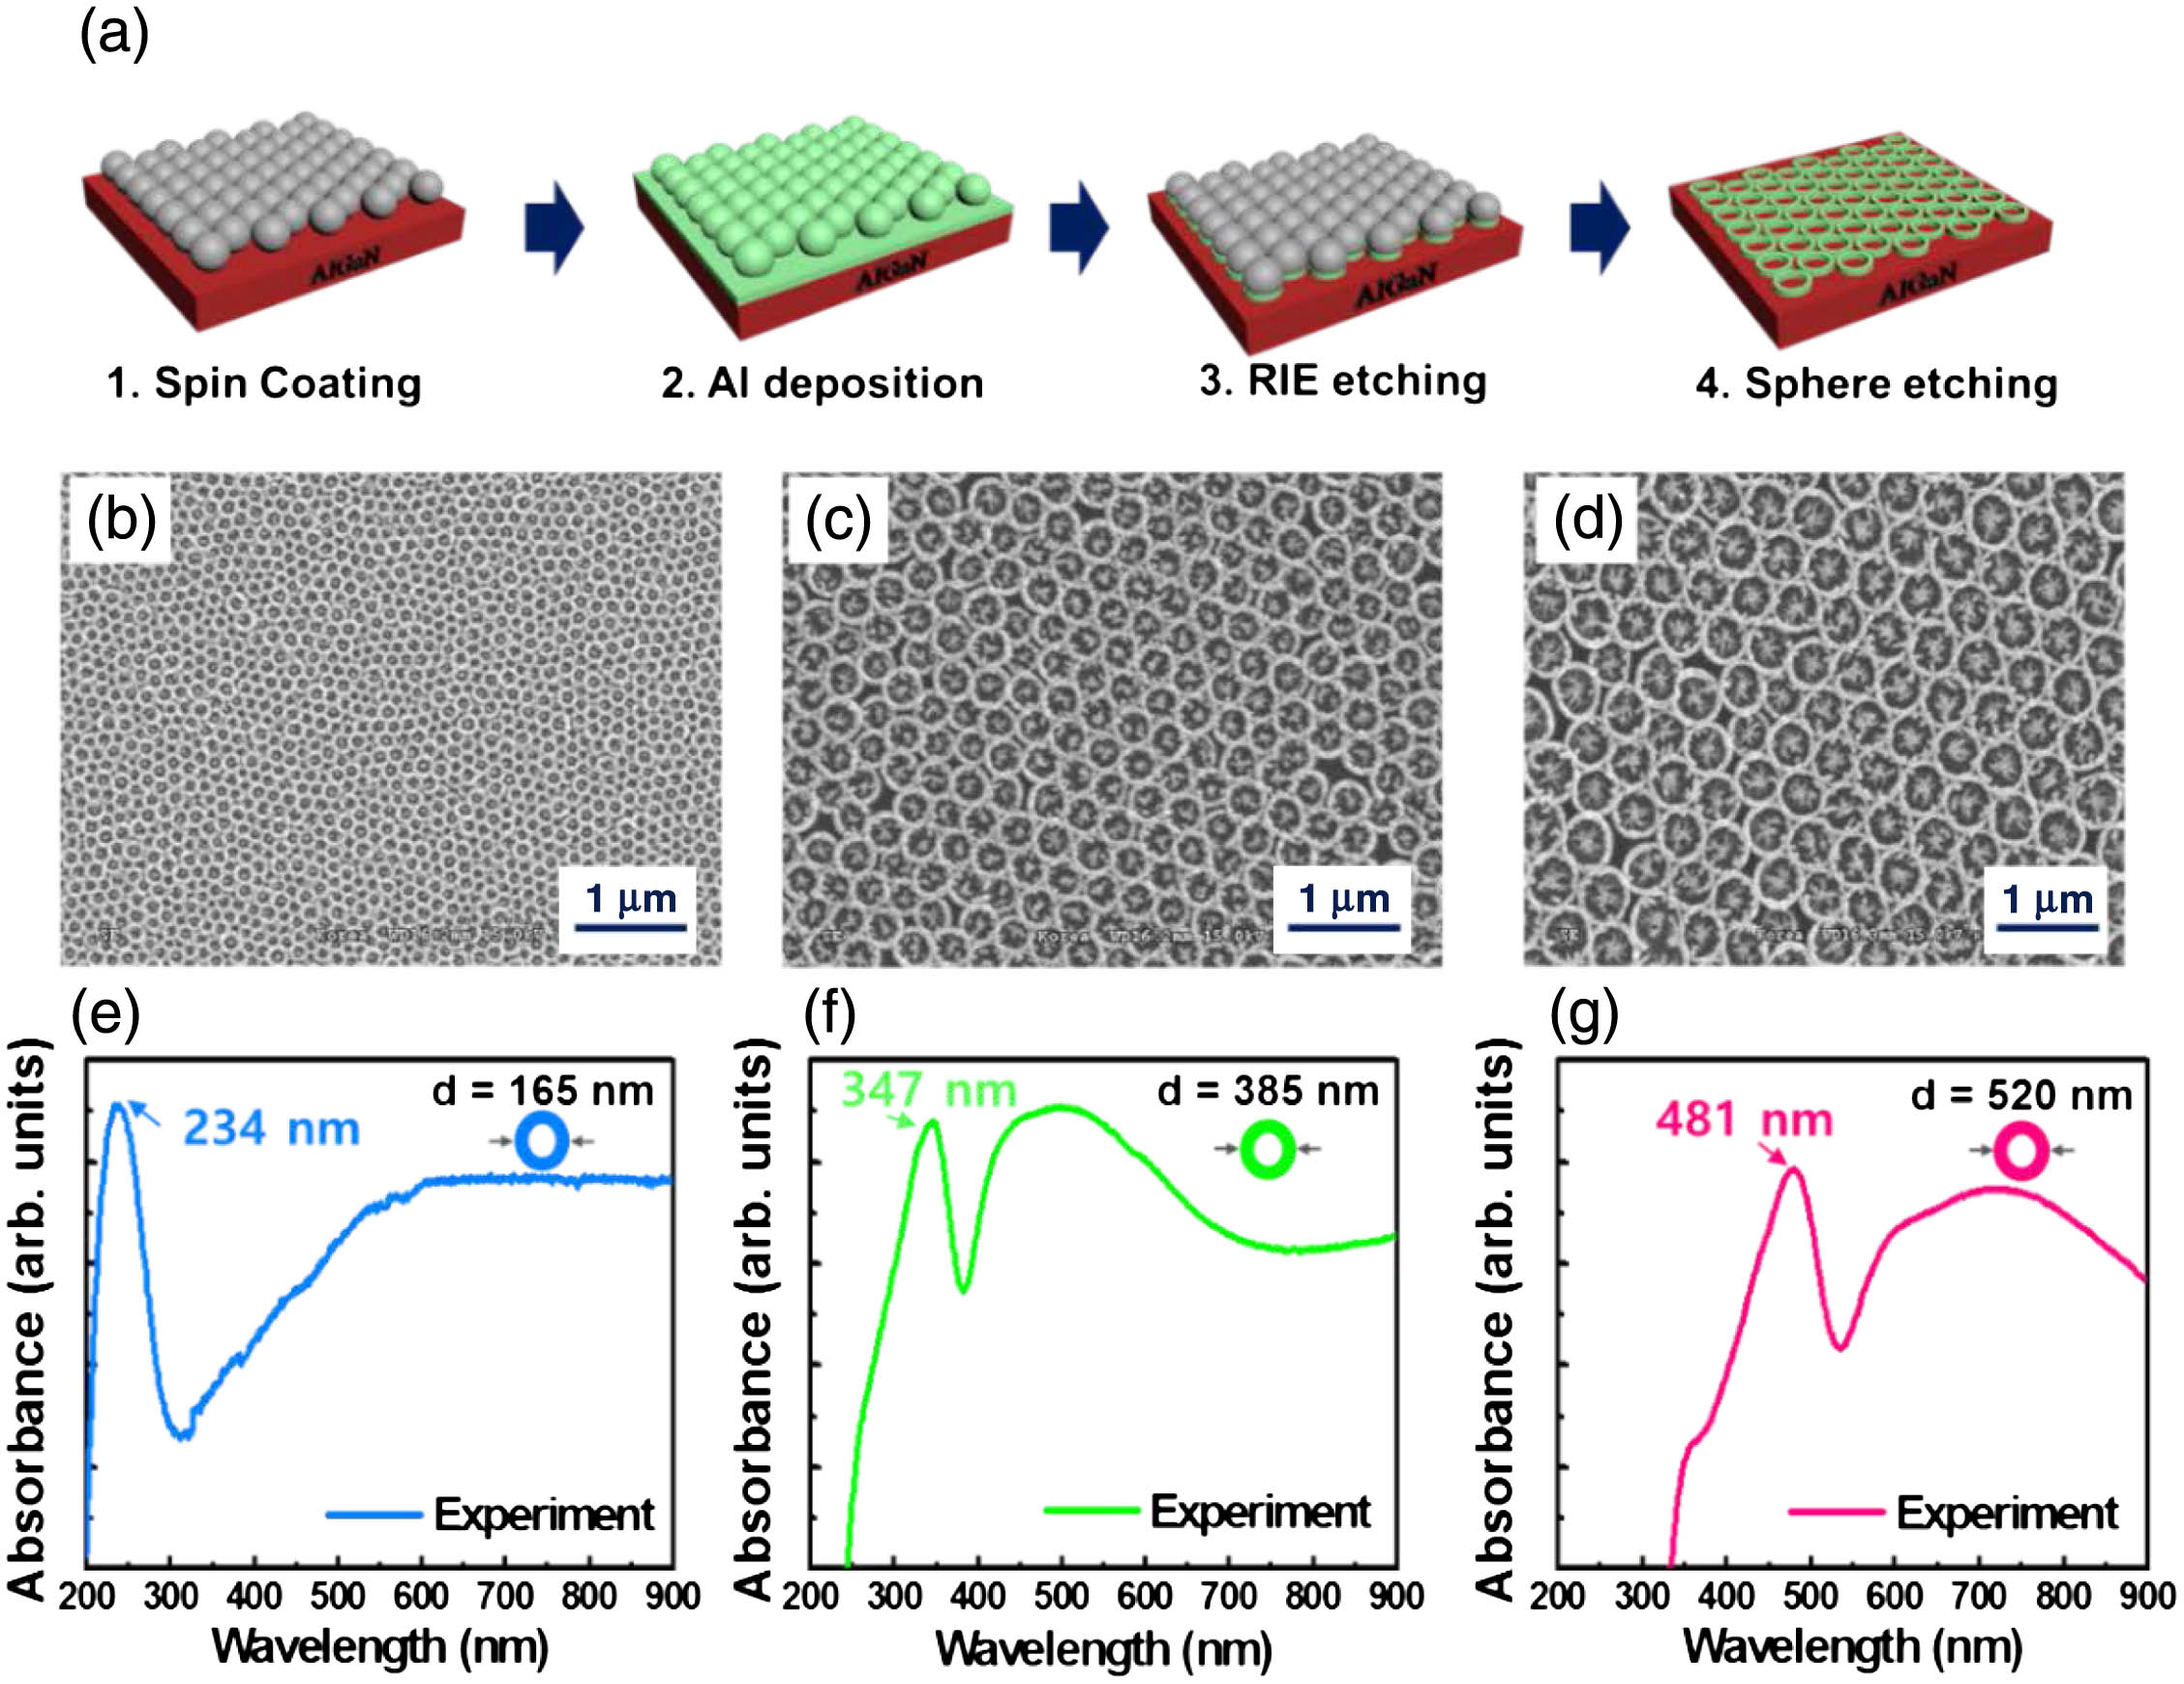 (a) Schematics of the processing steps used to fabricate Al nanoring arrays using SiO2 nanospheres. (b)–(d) SEM images showing top views of Al nanoring arrays fabricated using SiO2 nanospheres with diameters of 150, 300, and 450 nm, respectively. (e)–(g) Experimental absorbance spectra of the Al nanorings with outer diameters of 165, 385, and 520 nm, respectively.